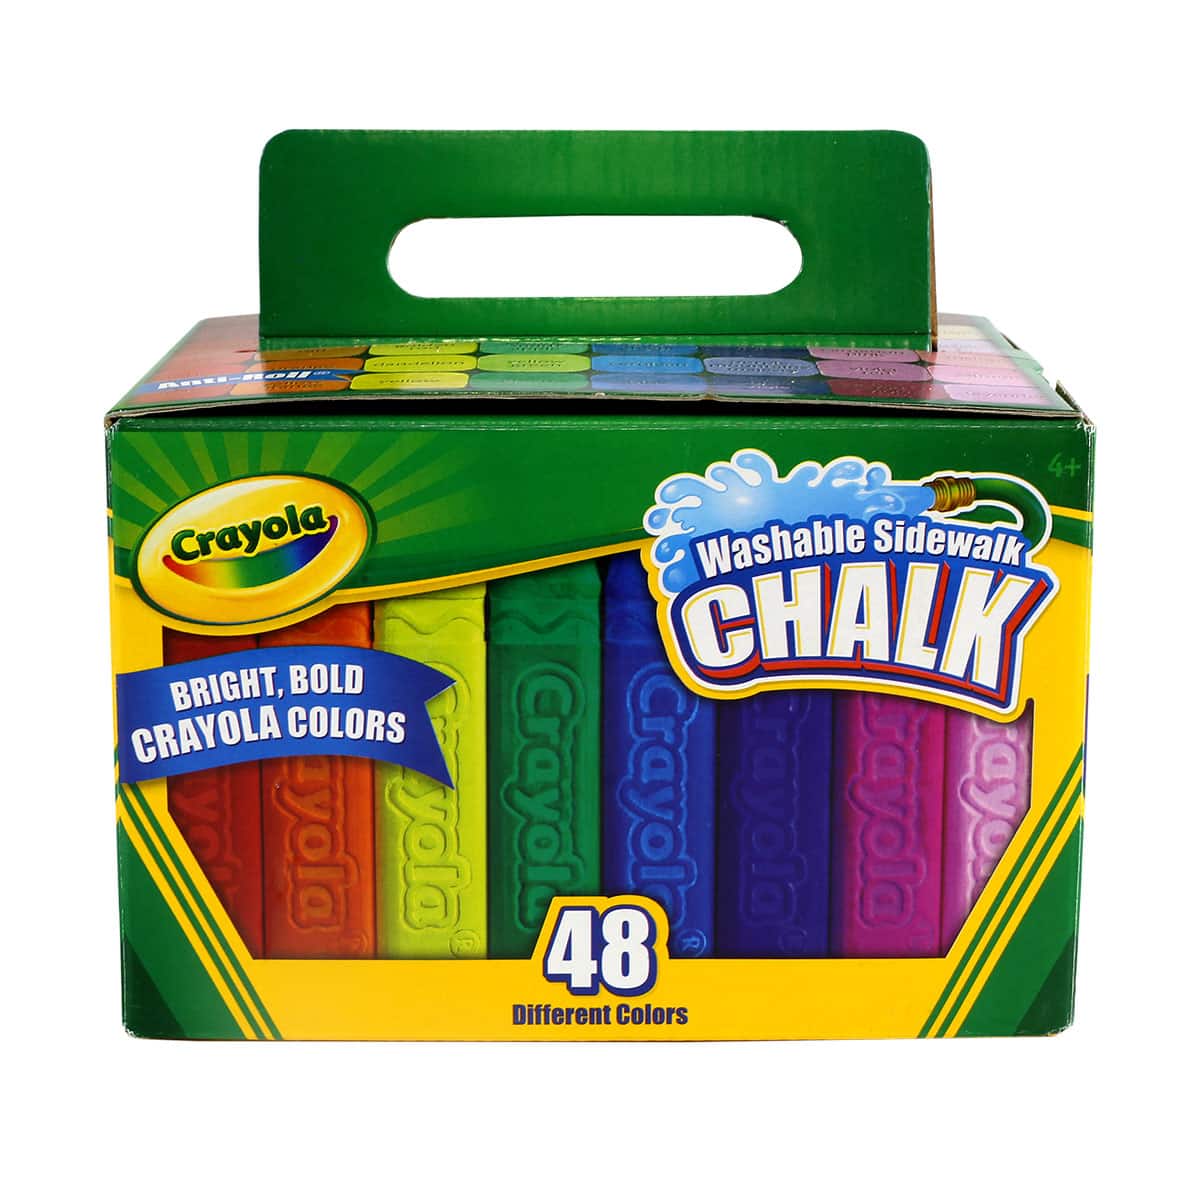 New Crayola Washable Sidewalk Chalk in Assorted Colors 48 Count 